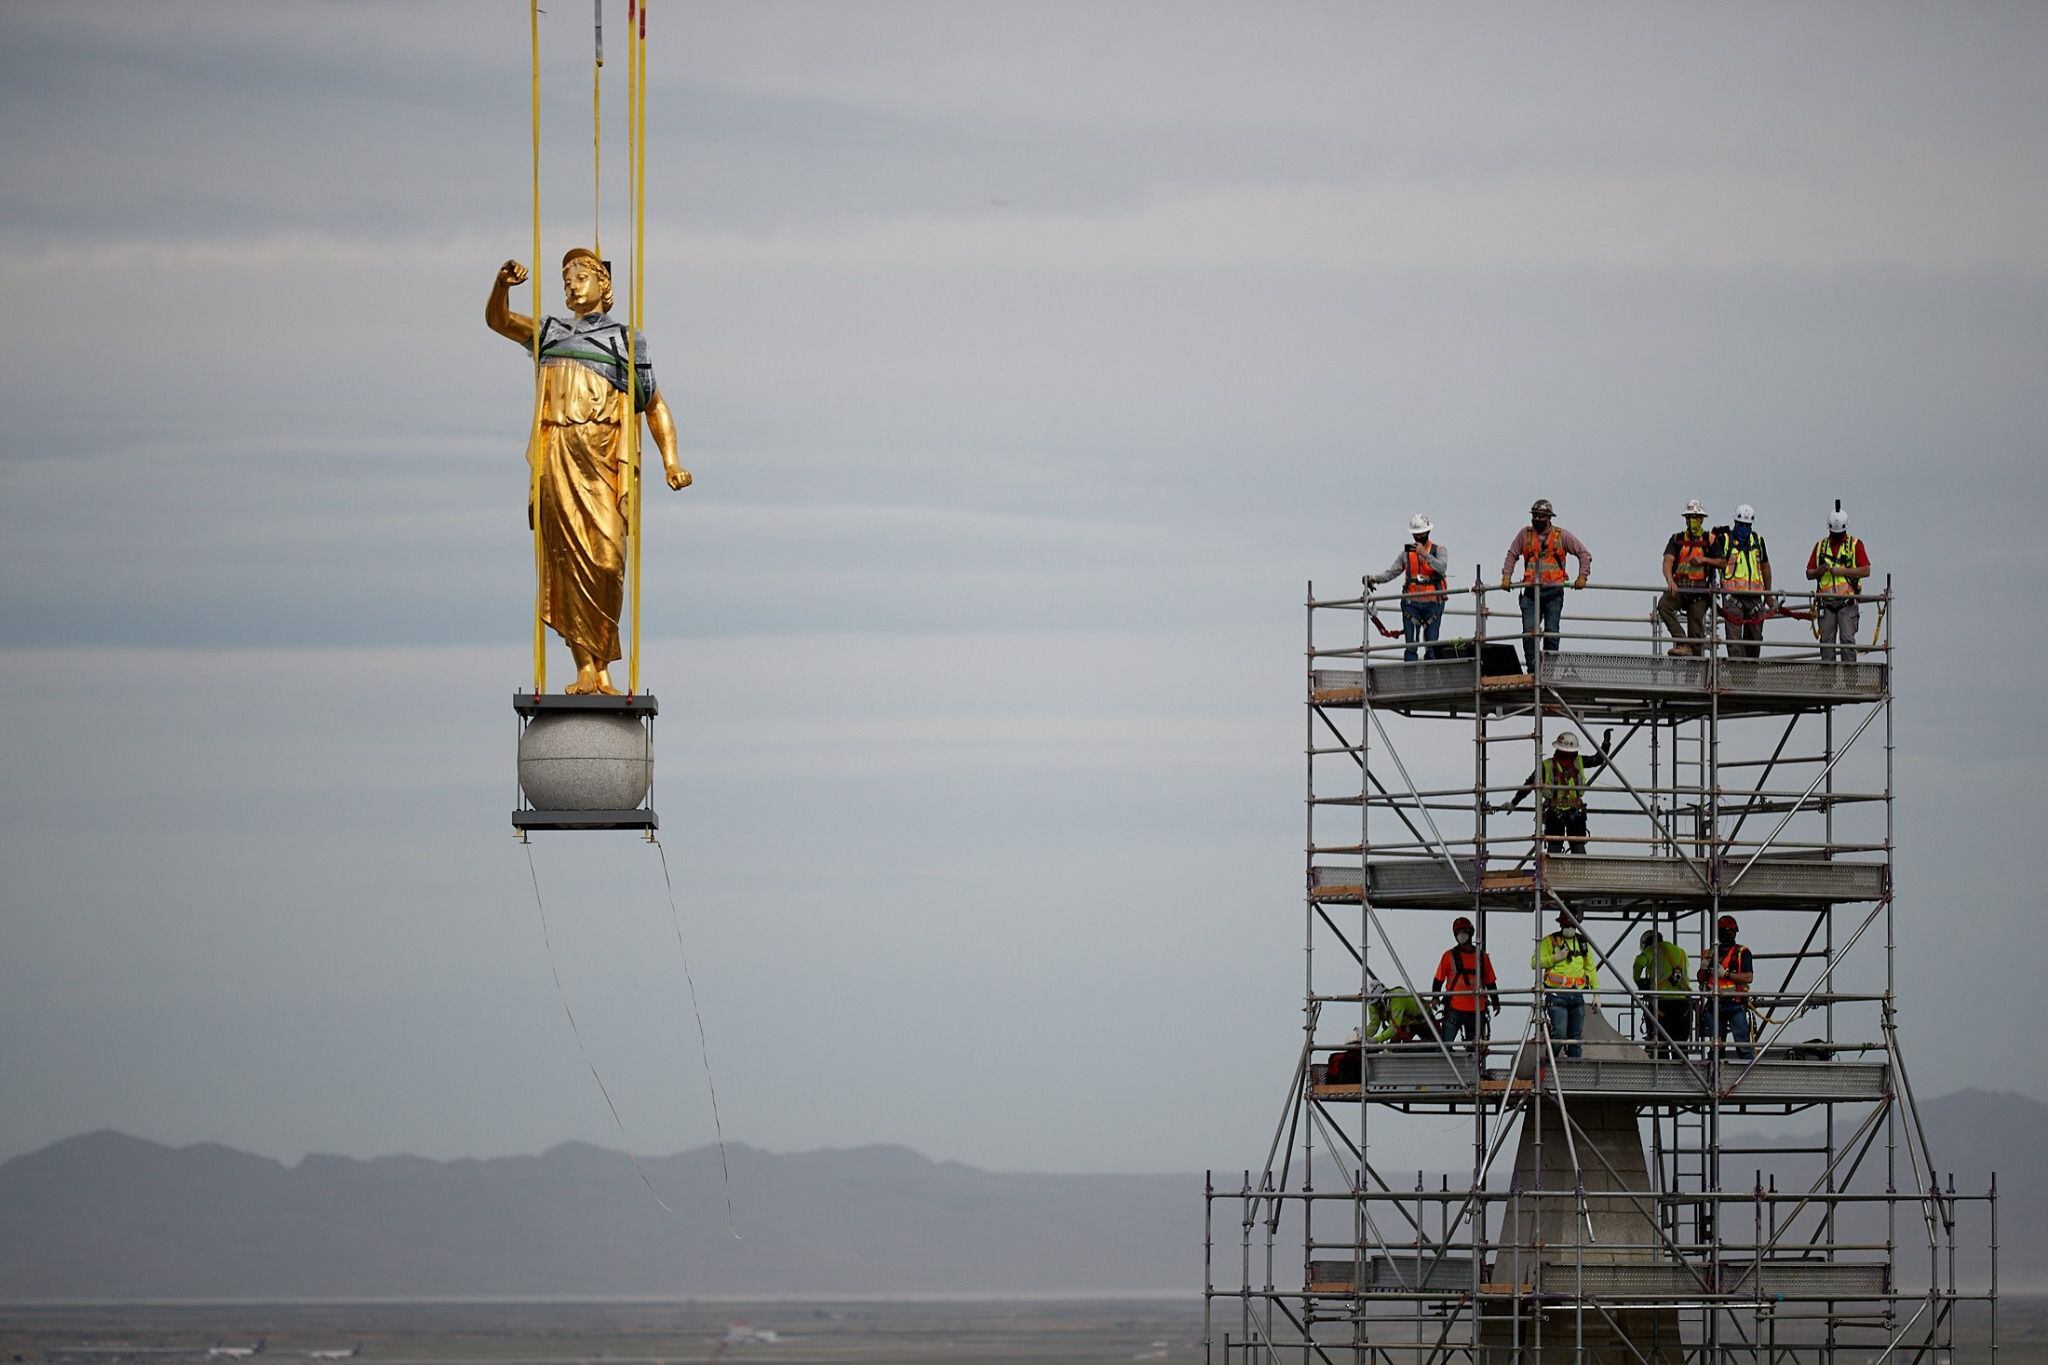 (photo courtesy The Church of Jesus Christ of Latter-day Saints) The angel Moroni and capstone being removed by a large crane with artisan journeyman viewing in the background as part of the ongoing renovation of the Salt Lake Temple, May 18, 2020.